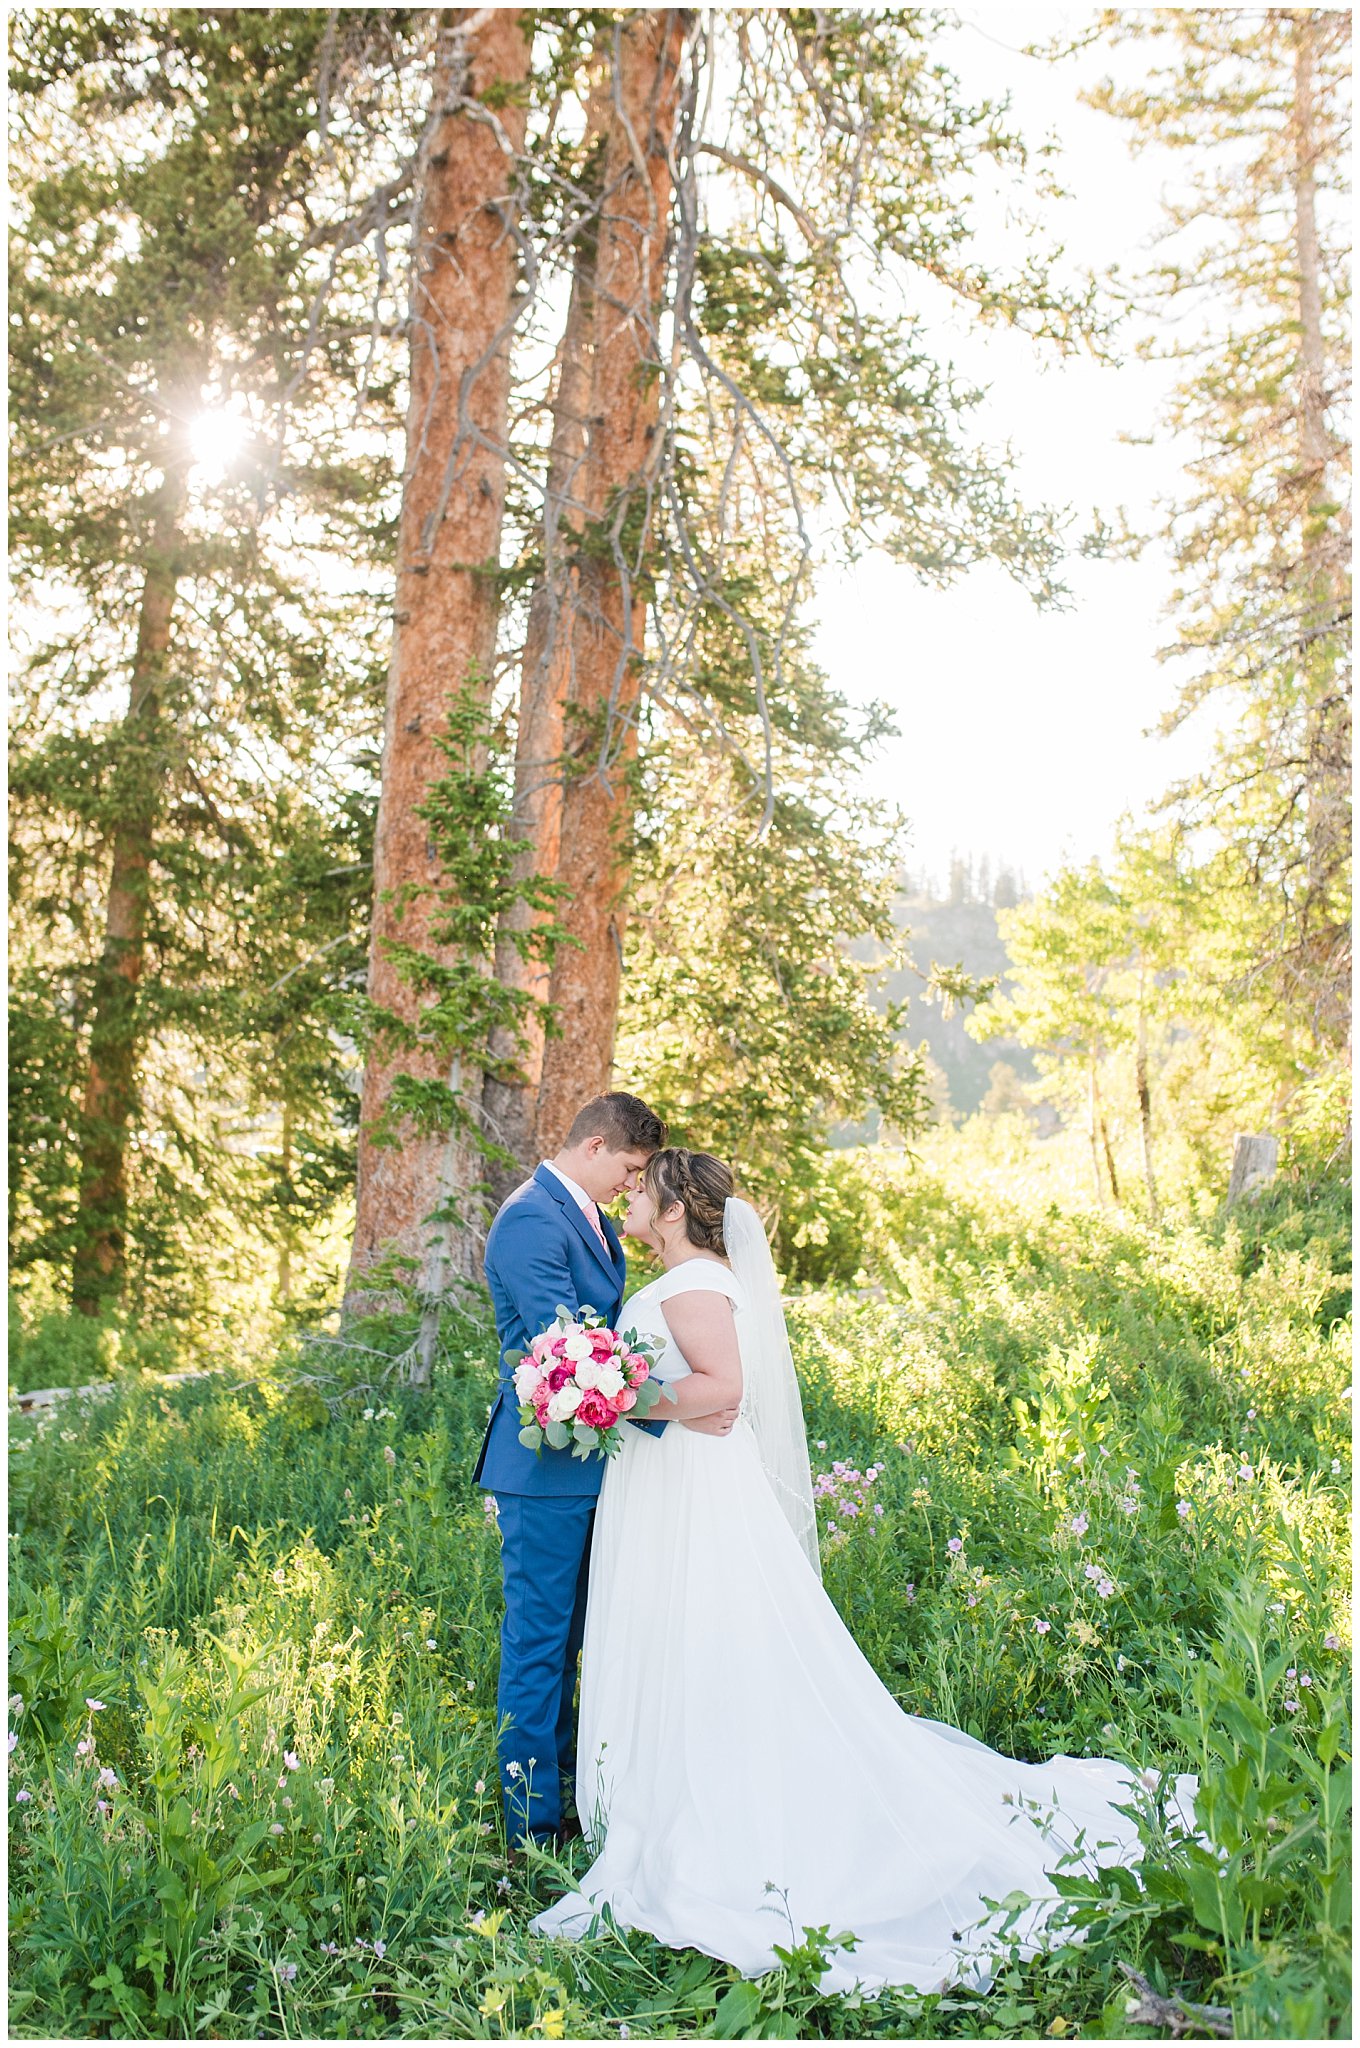 Bride and groom portraits in the Utah mountains wearing flowy wedding dress and cornish blue suit with pink and white florals | Summer Mountain wildflowers | Tony Grove Summer Formal Session | Jessie and Dallin Photography